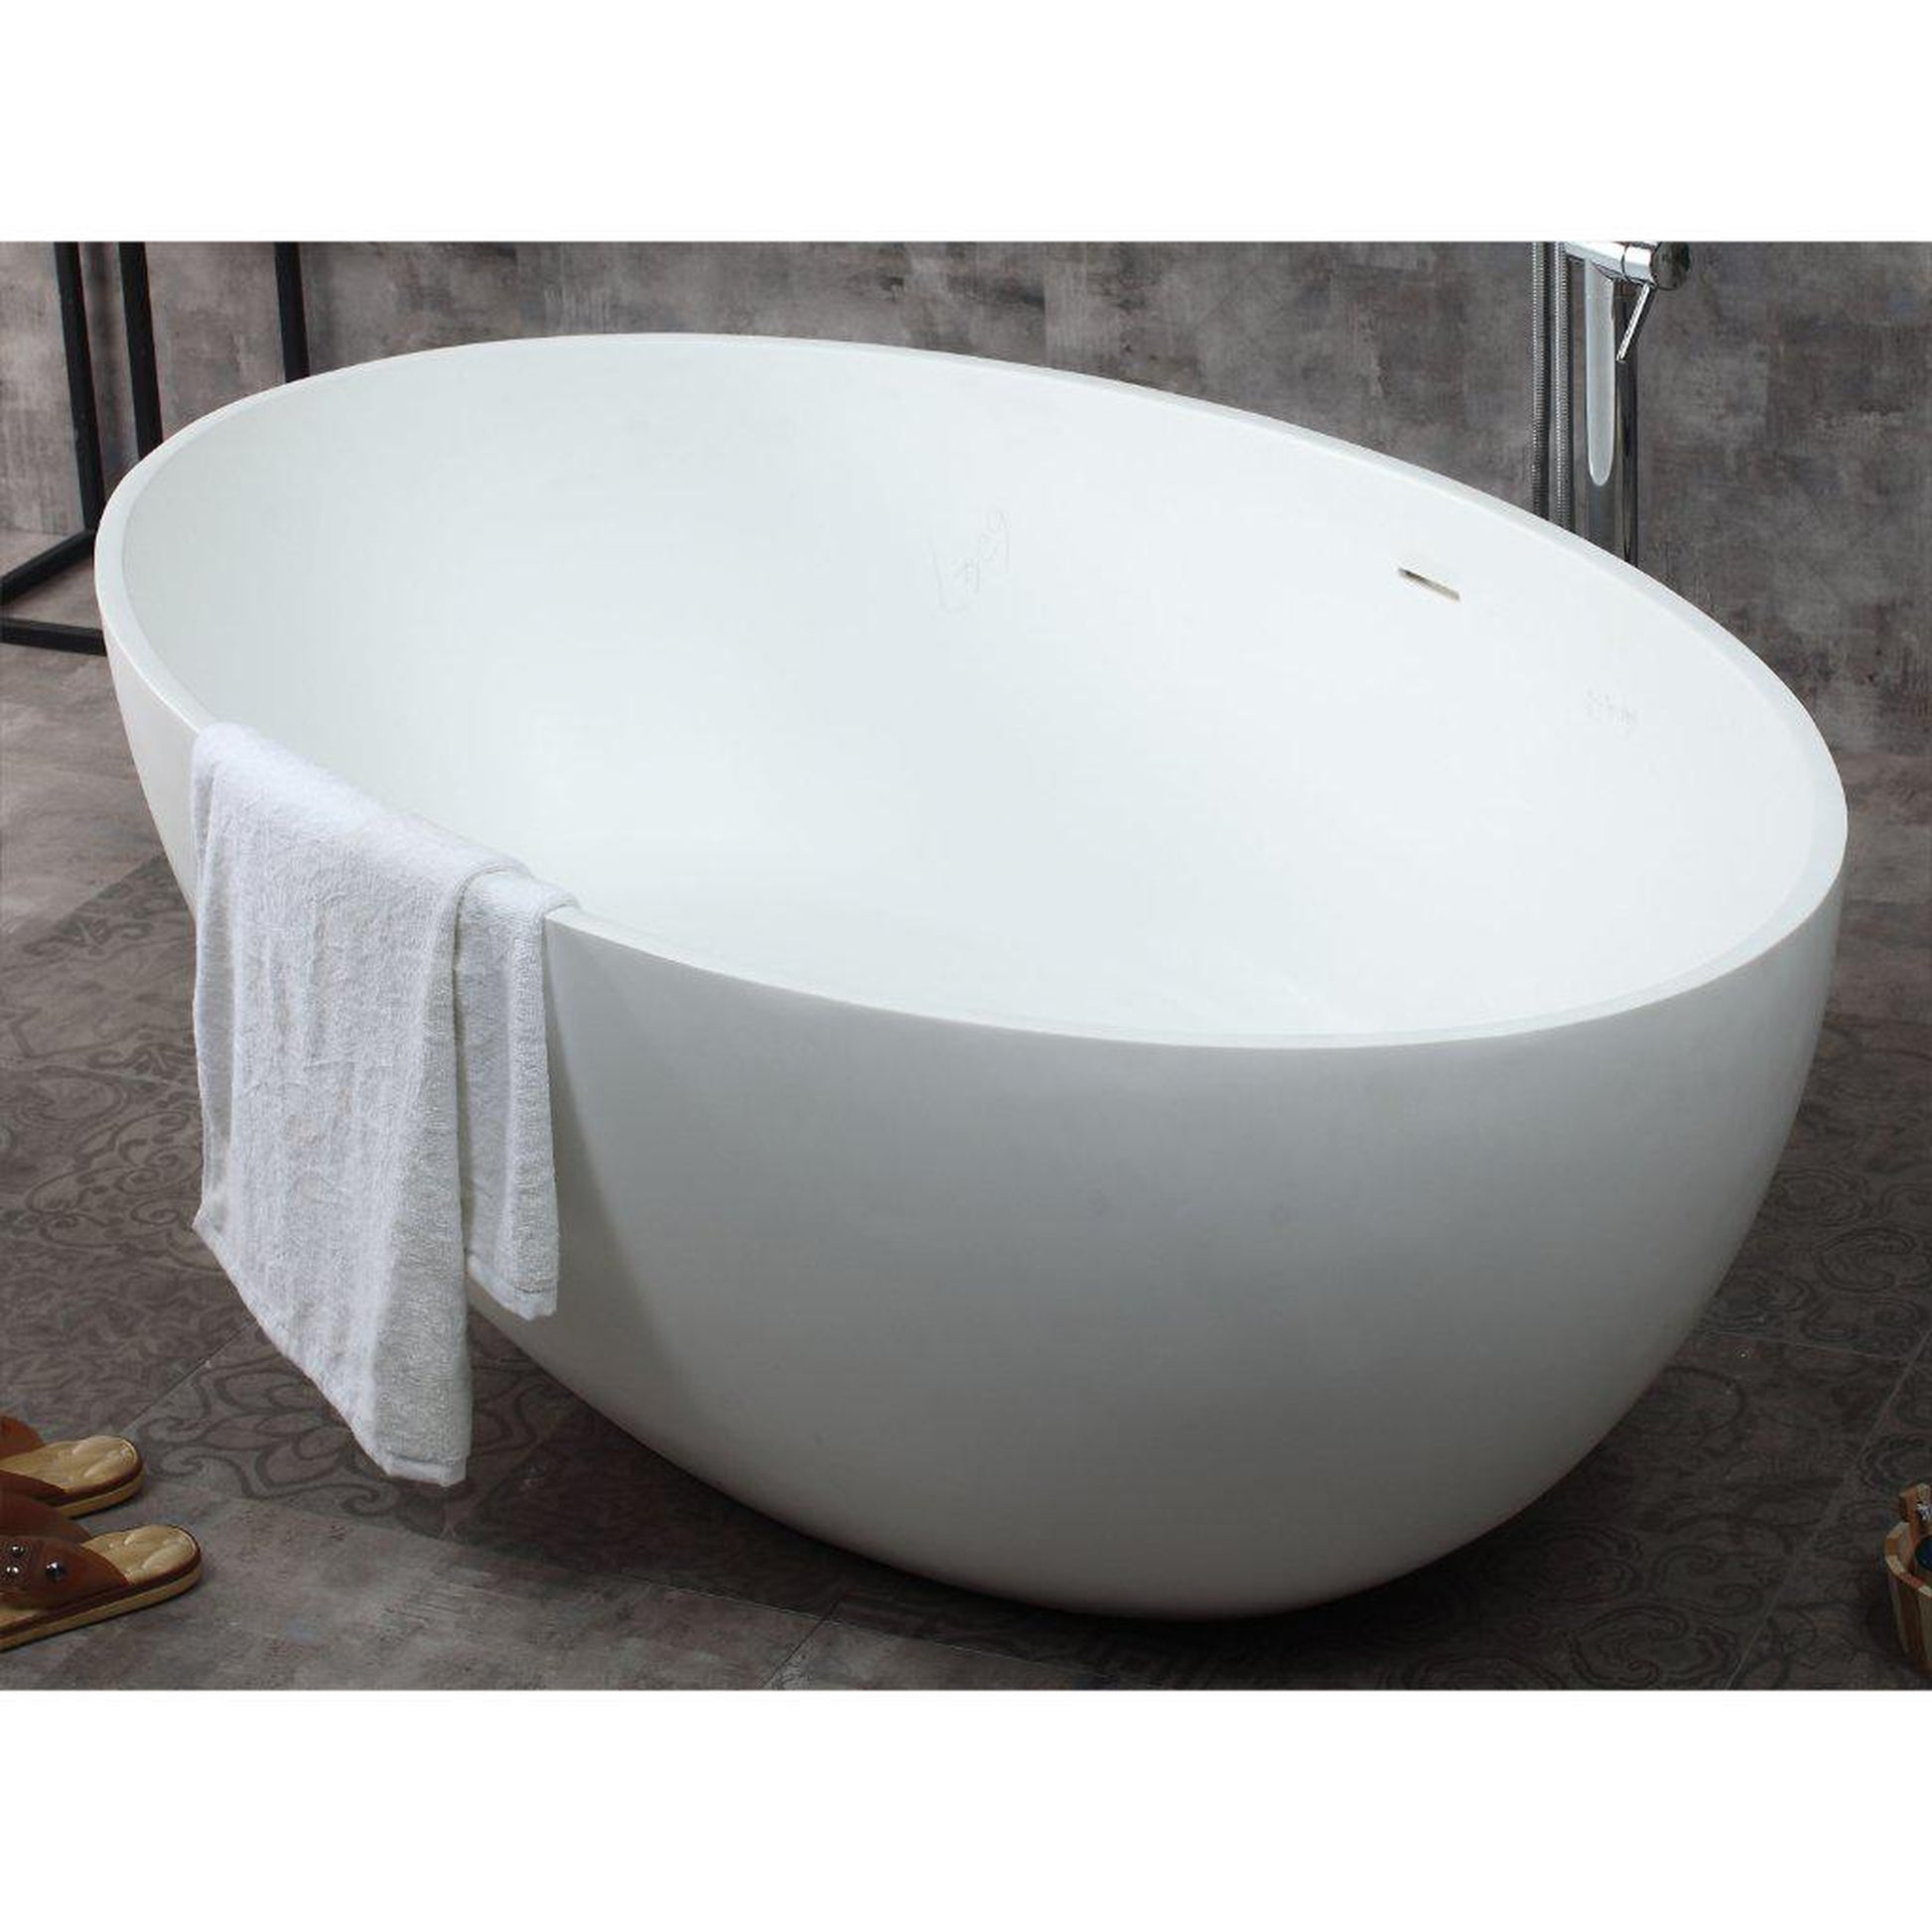 ALFI Brand AB9941 67" One Person Freestanding White Oval Solid Surface Smooth Resin Soaking Bathtub